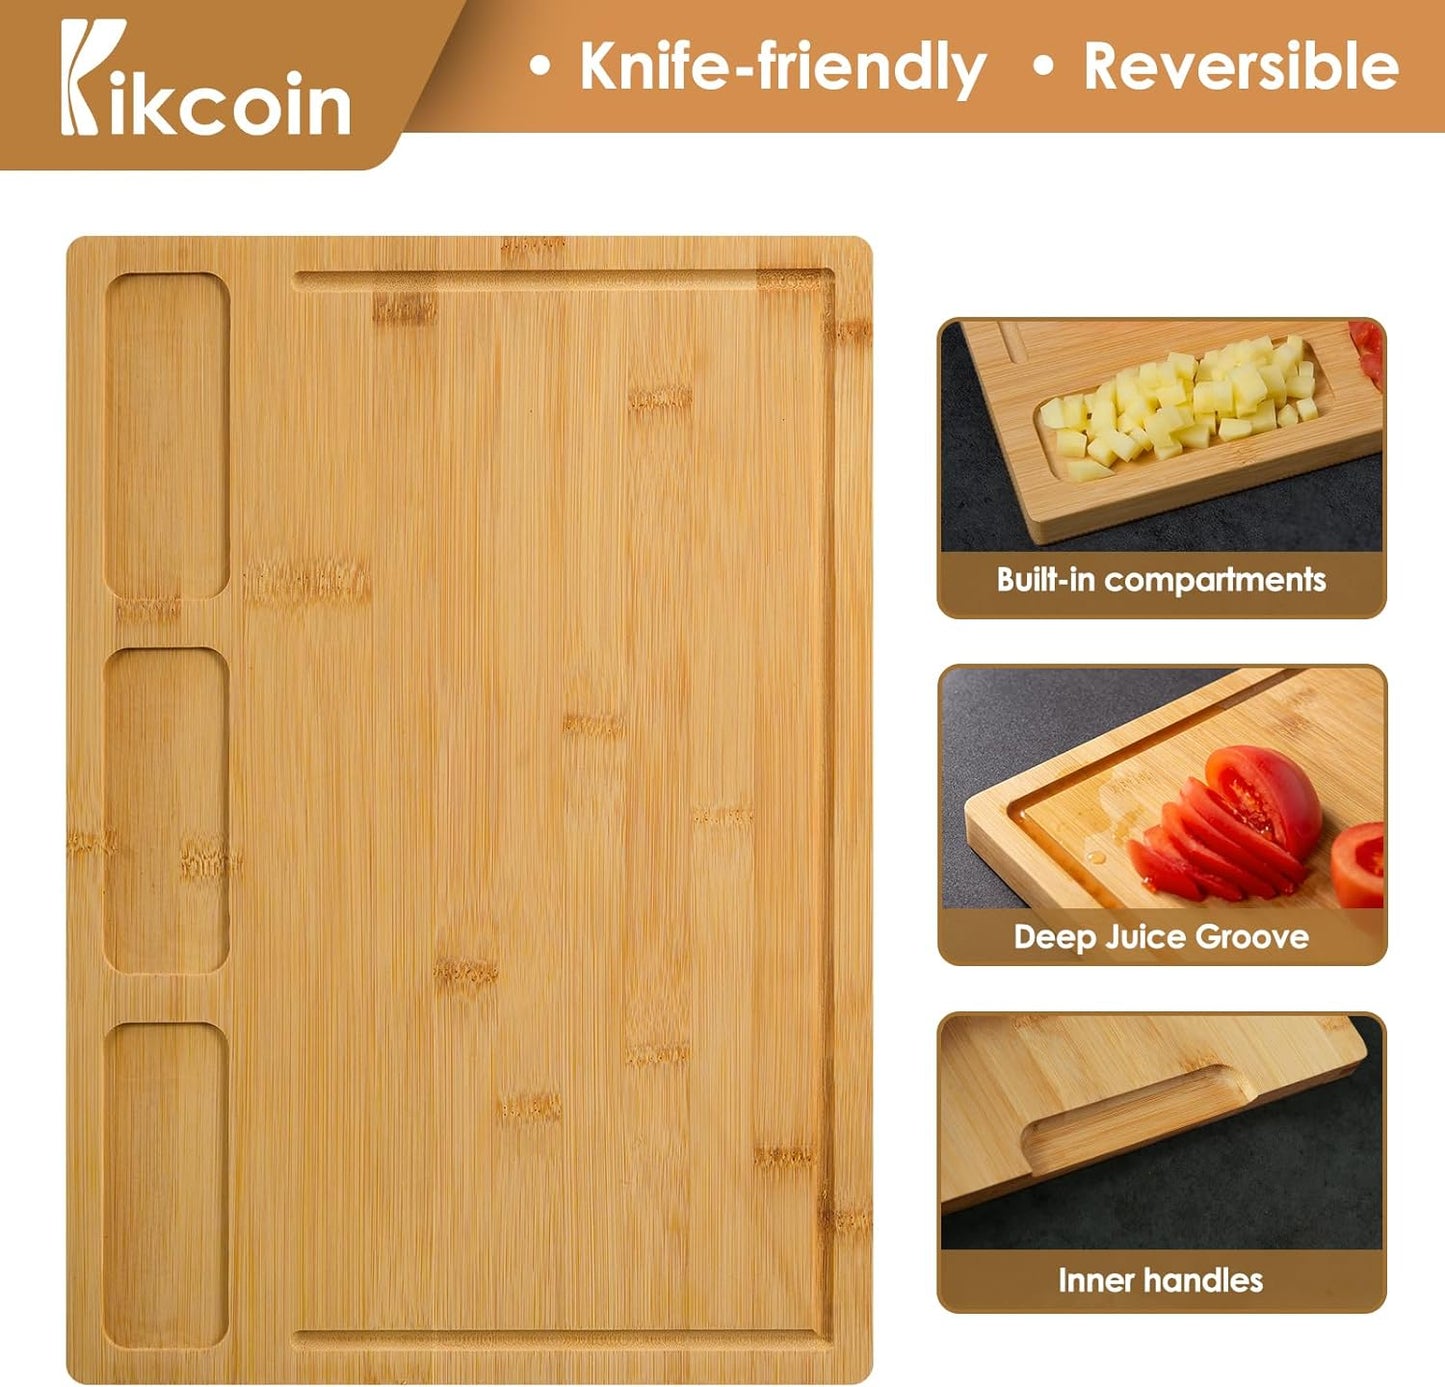 Bamboo Cutting Boards for Kitchen - Set of 3 - Featuring Built-In Compartments, Juice Groove, Heavy-Duty Serving Tray Butcher Block, Carving, and Chopping Tasks